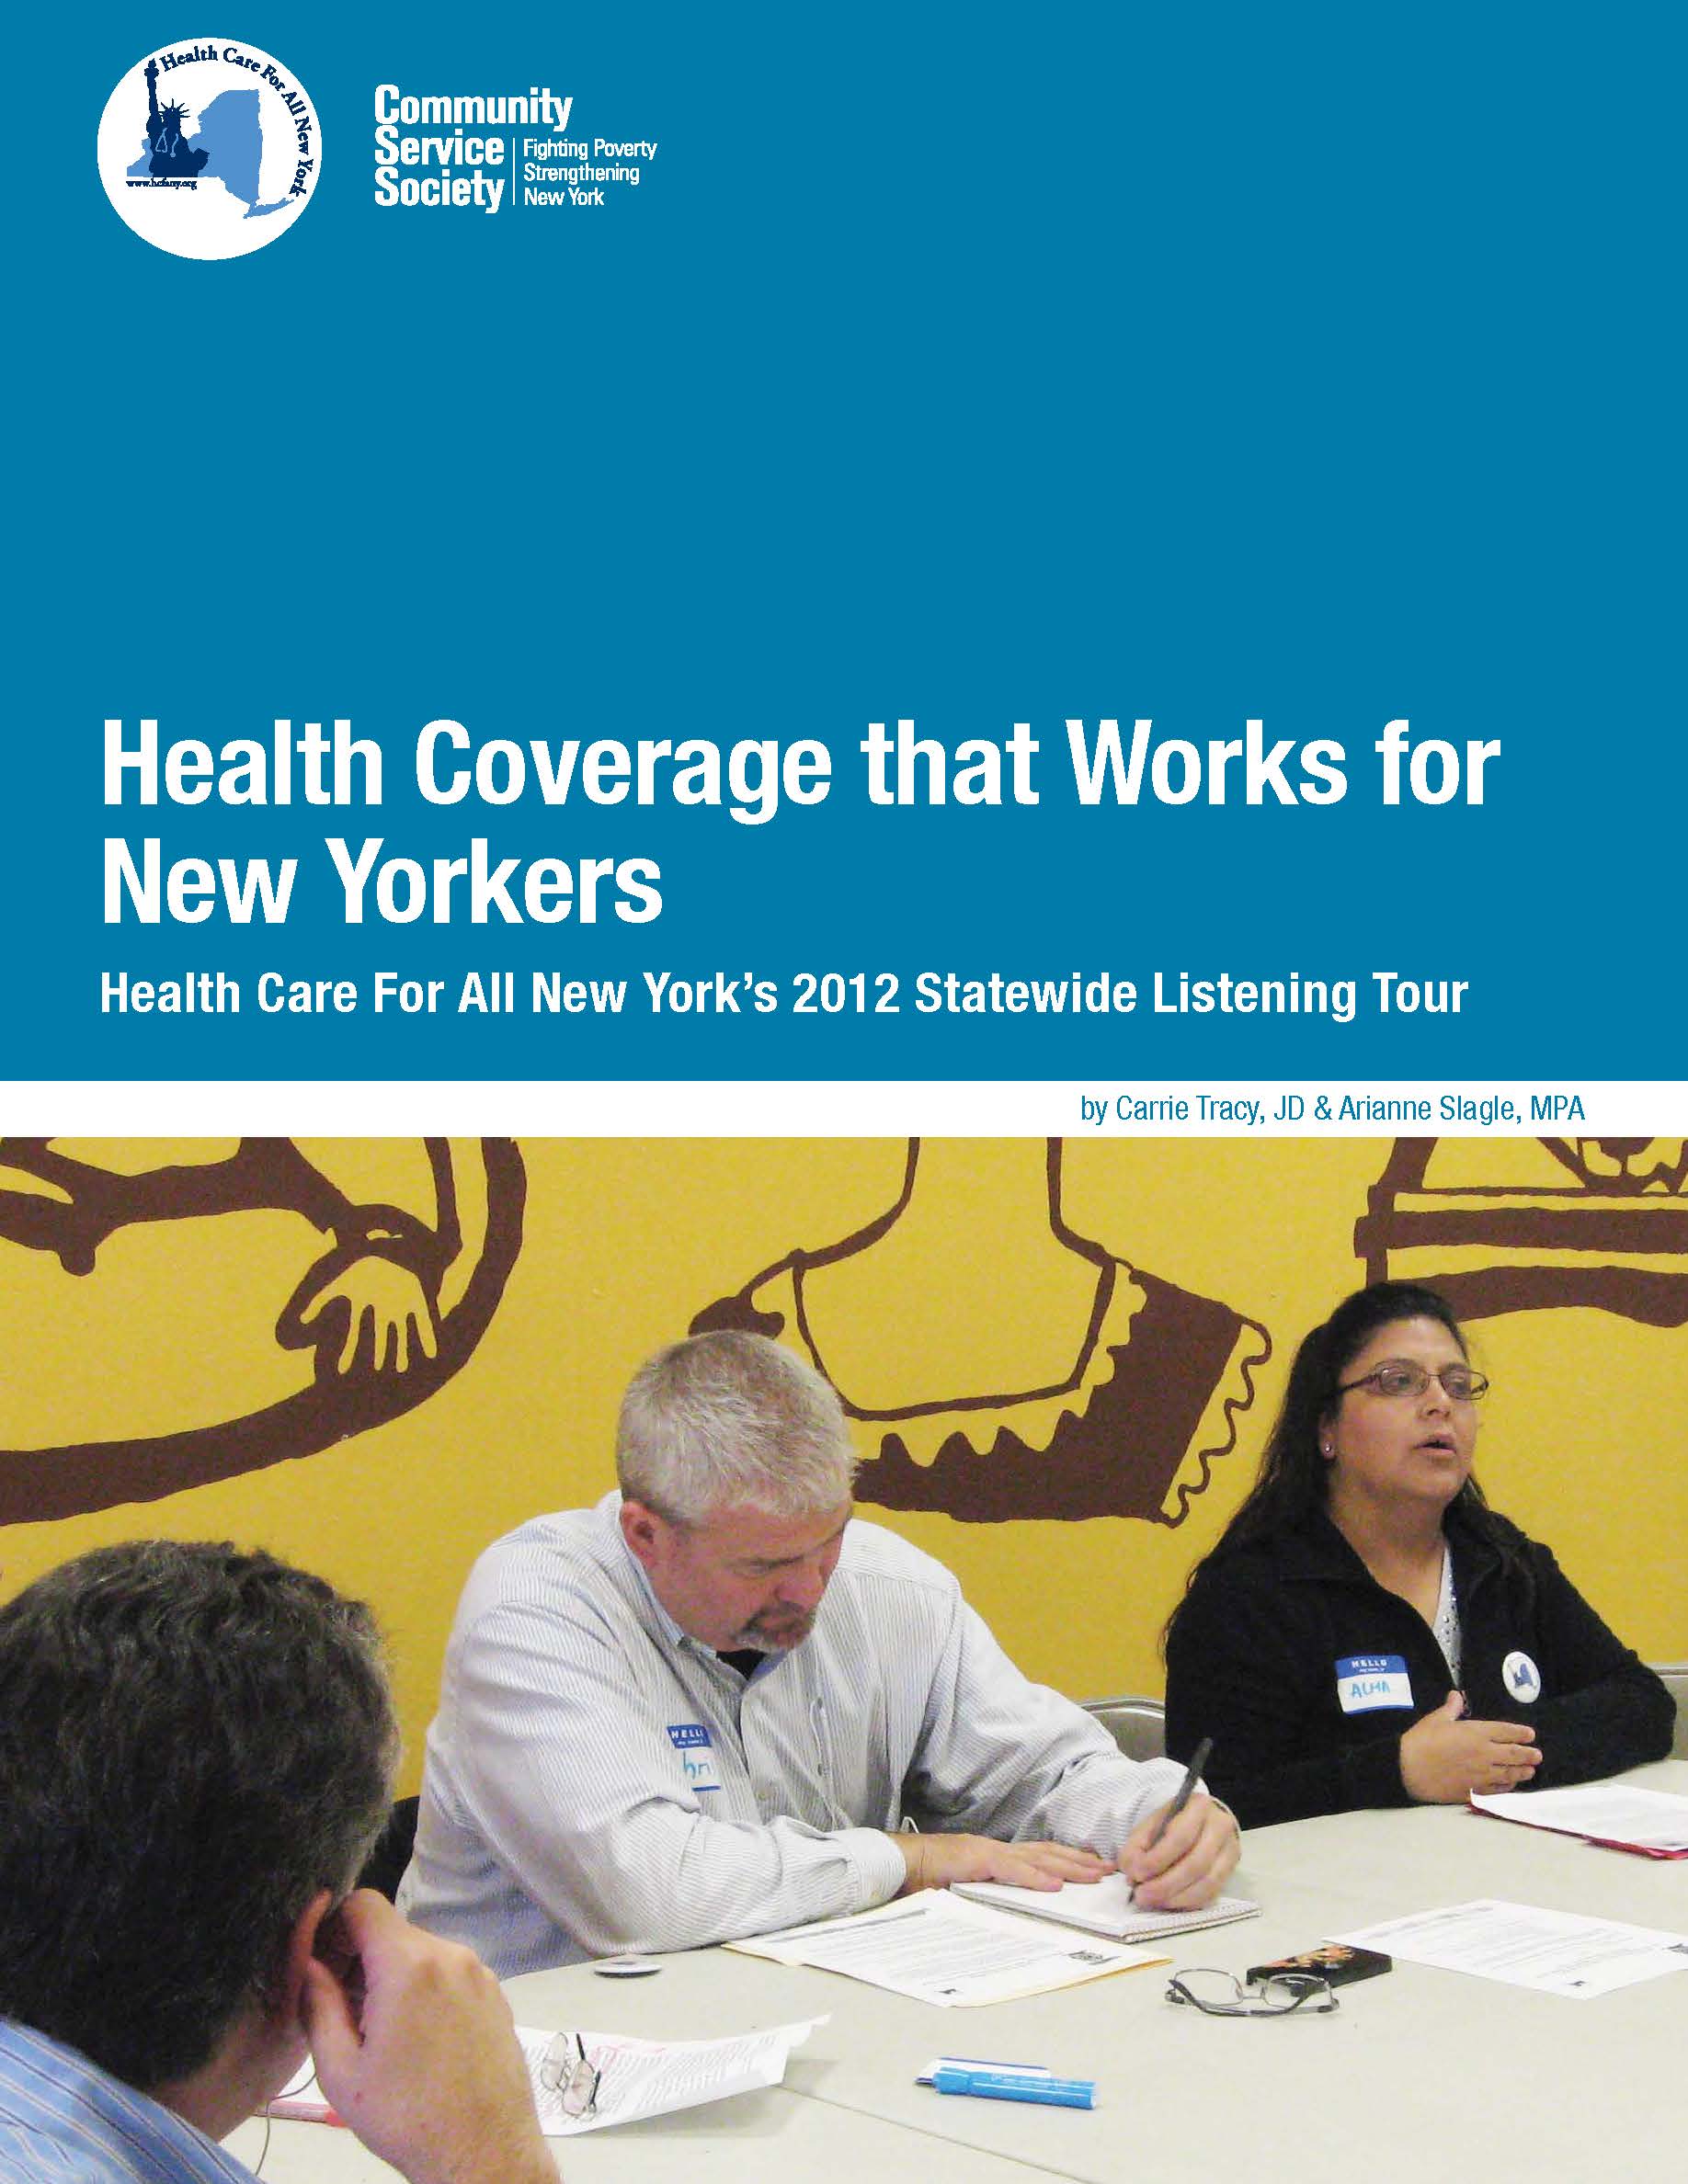 Health Coverage that Works for New Yorkers: Health Care For All New York's 2012 Listening Tour